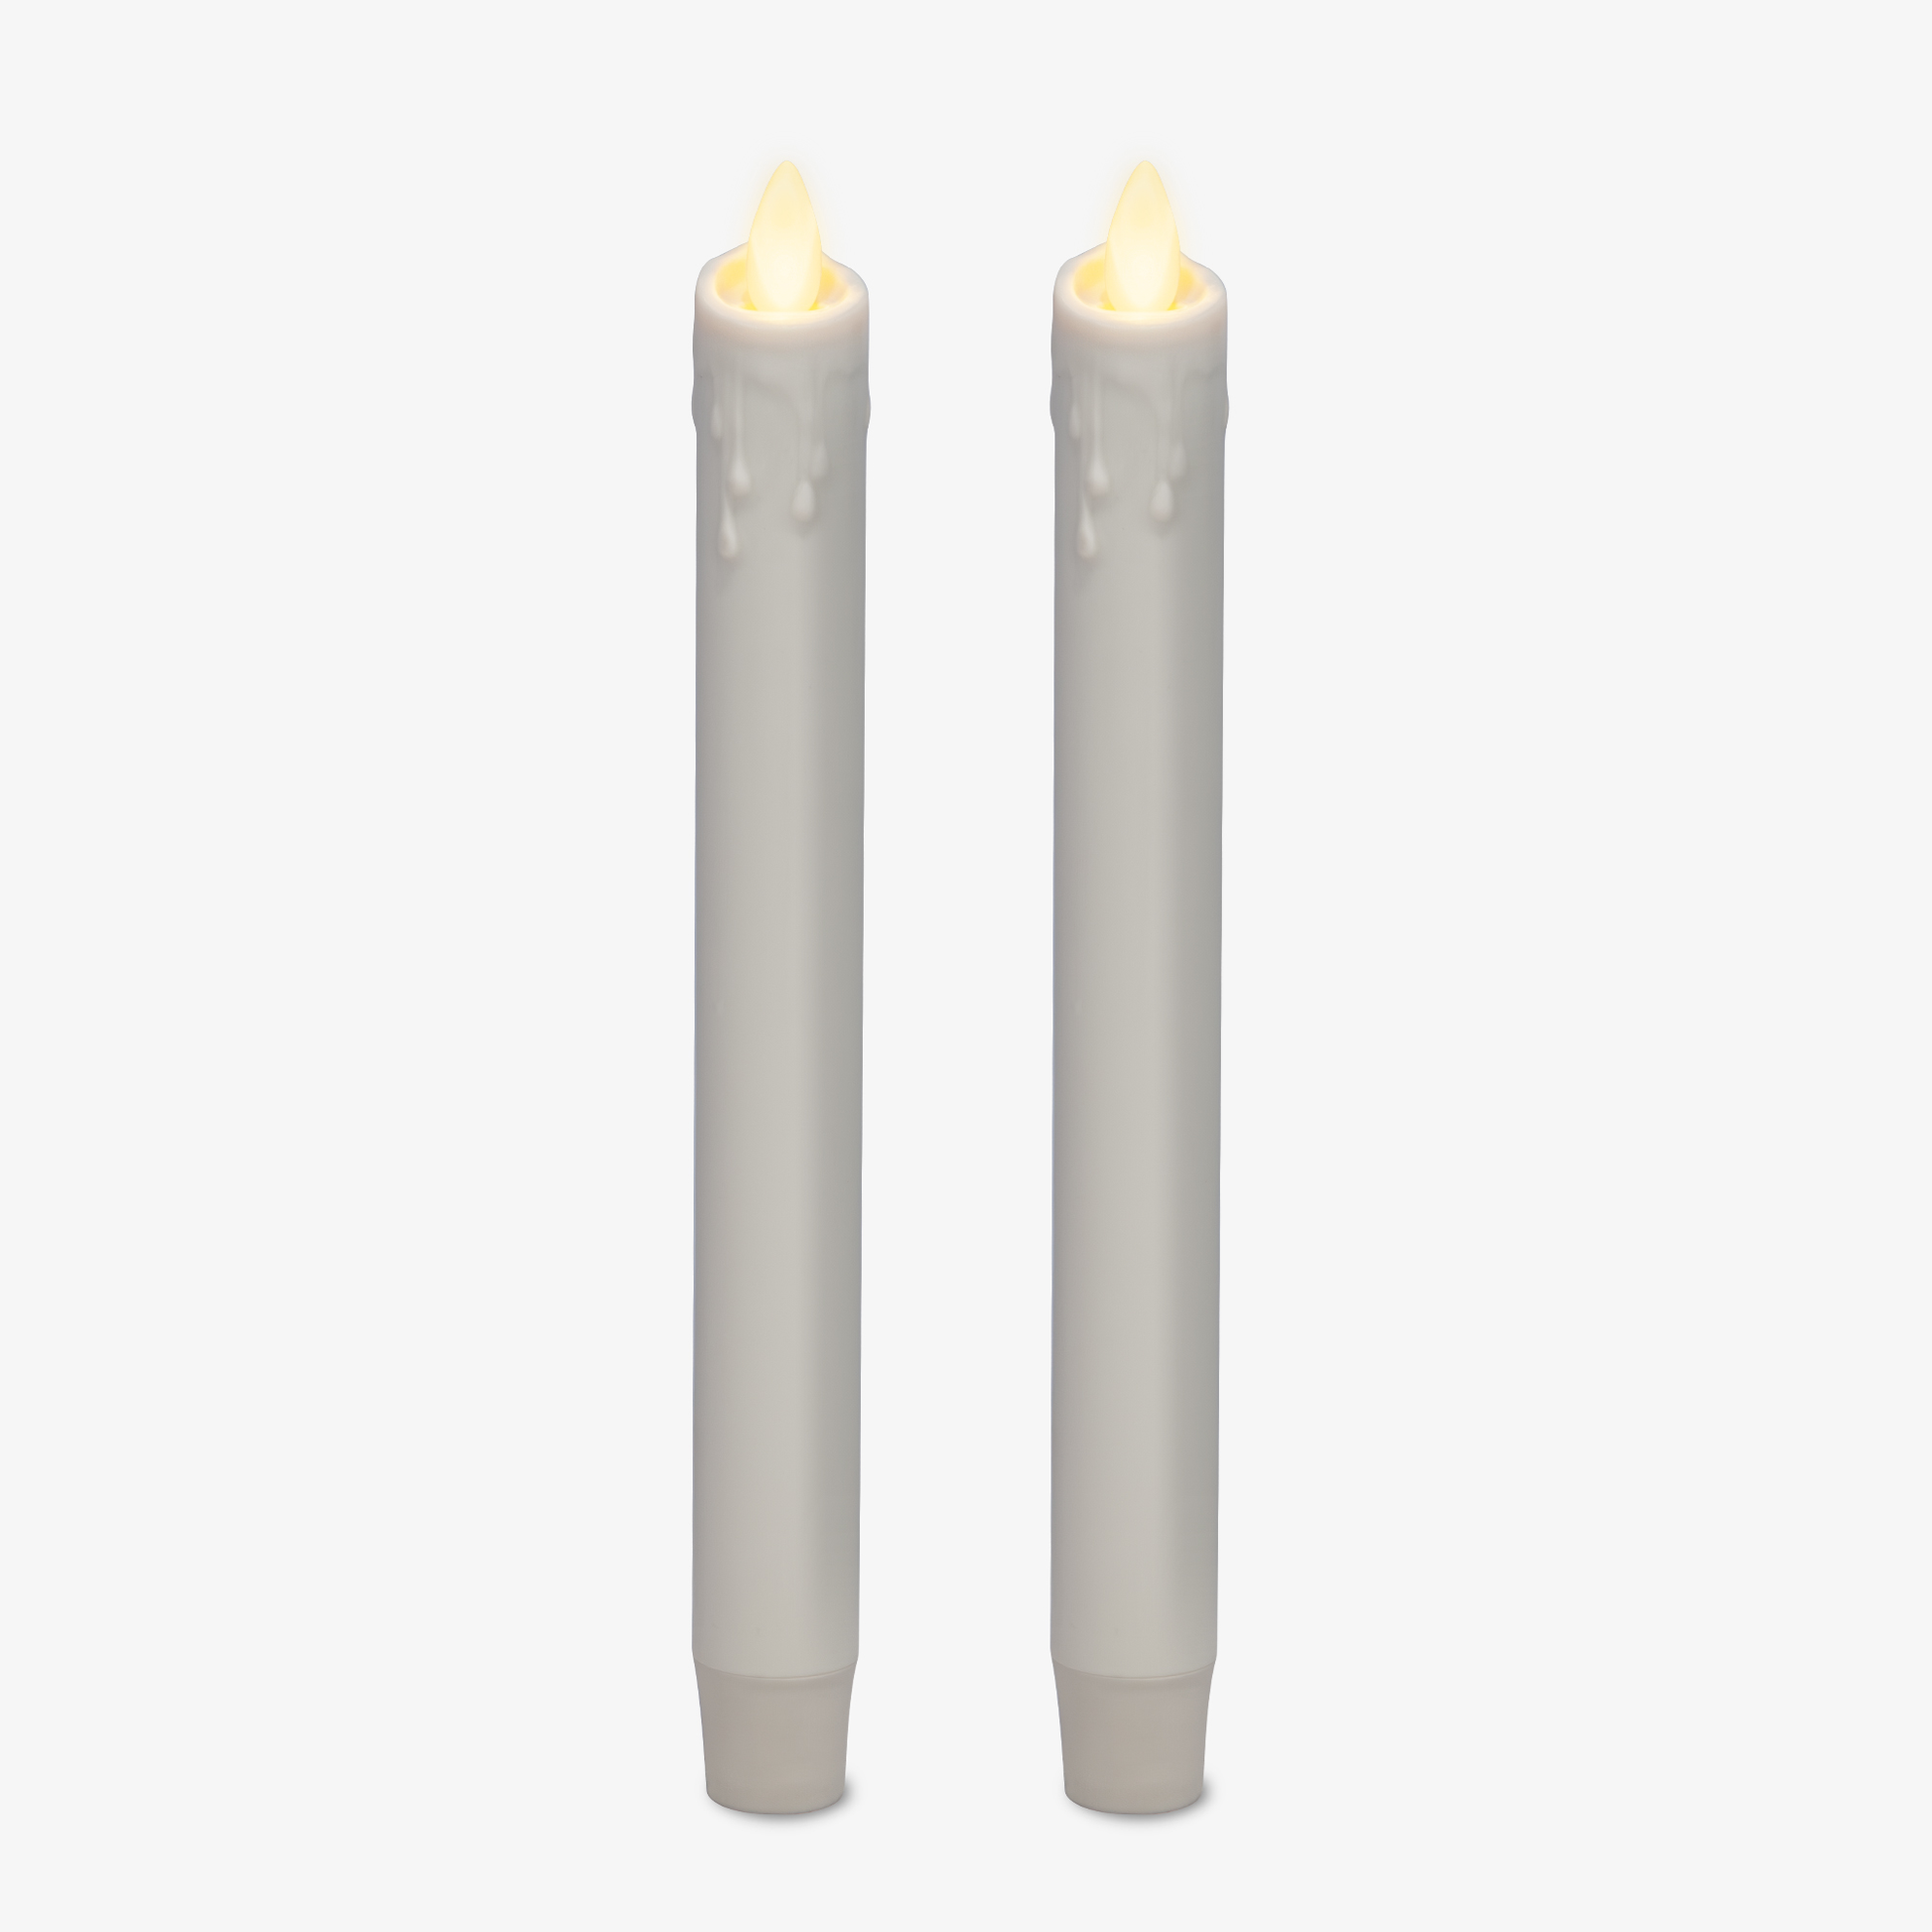 An image of Luminara's flameless white taper candle